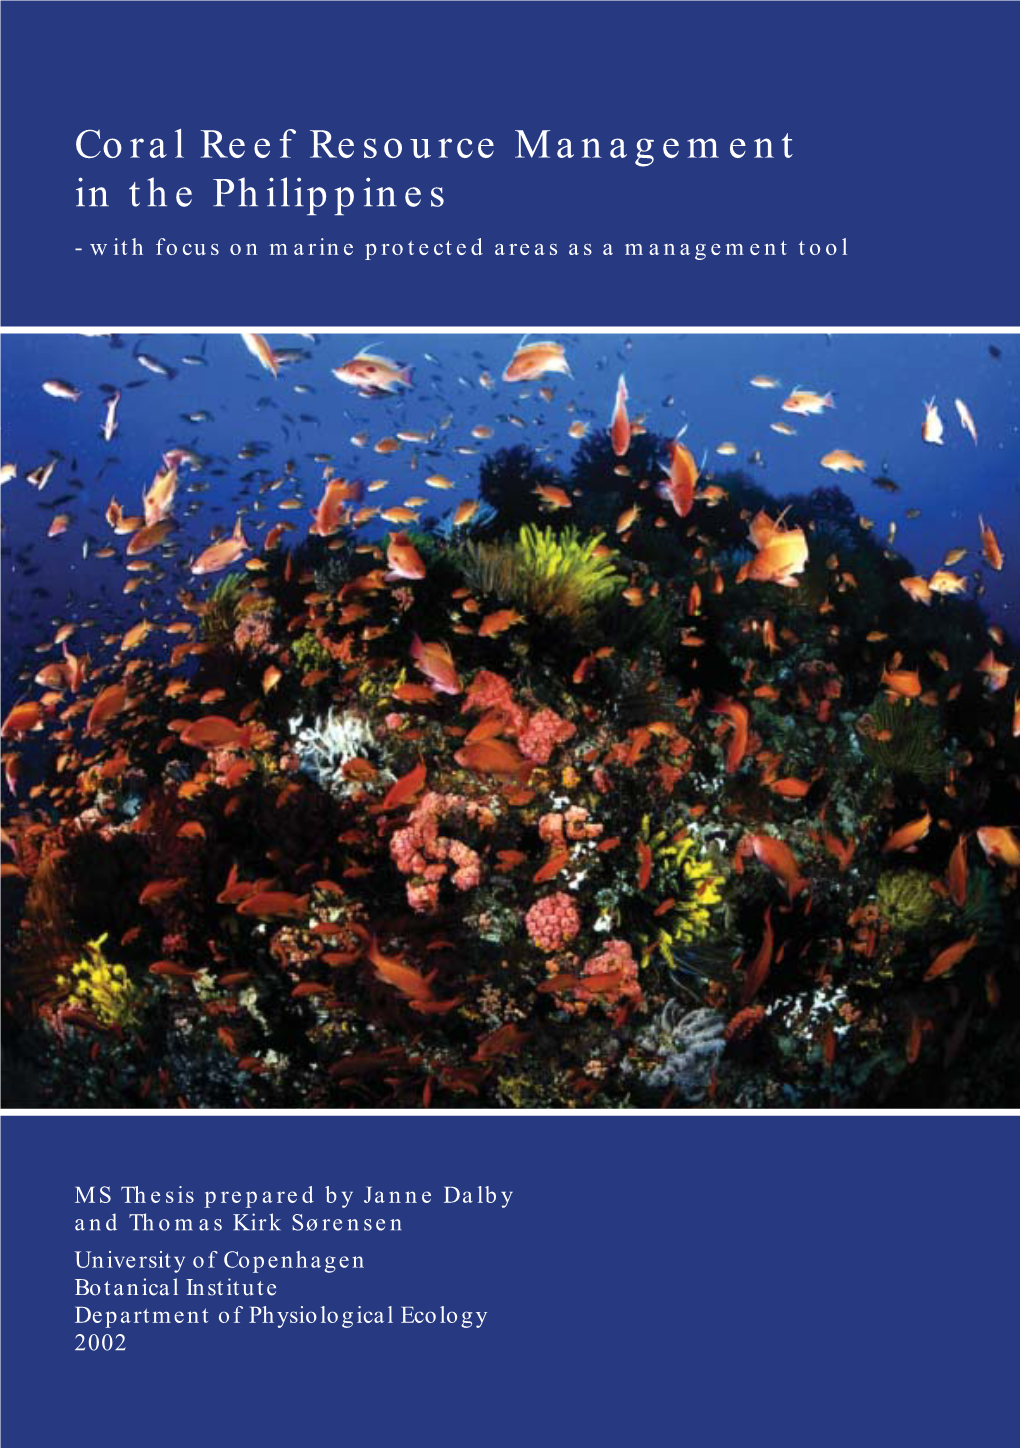 Coral Reef Resource Management in the Philippines - with Focus on Marine Protected Areas As a Management Tool